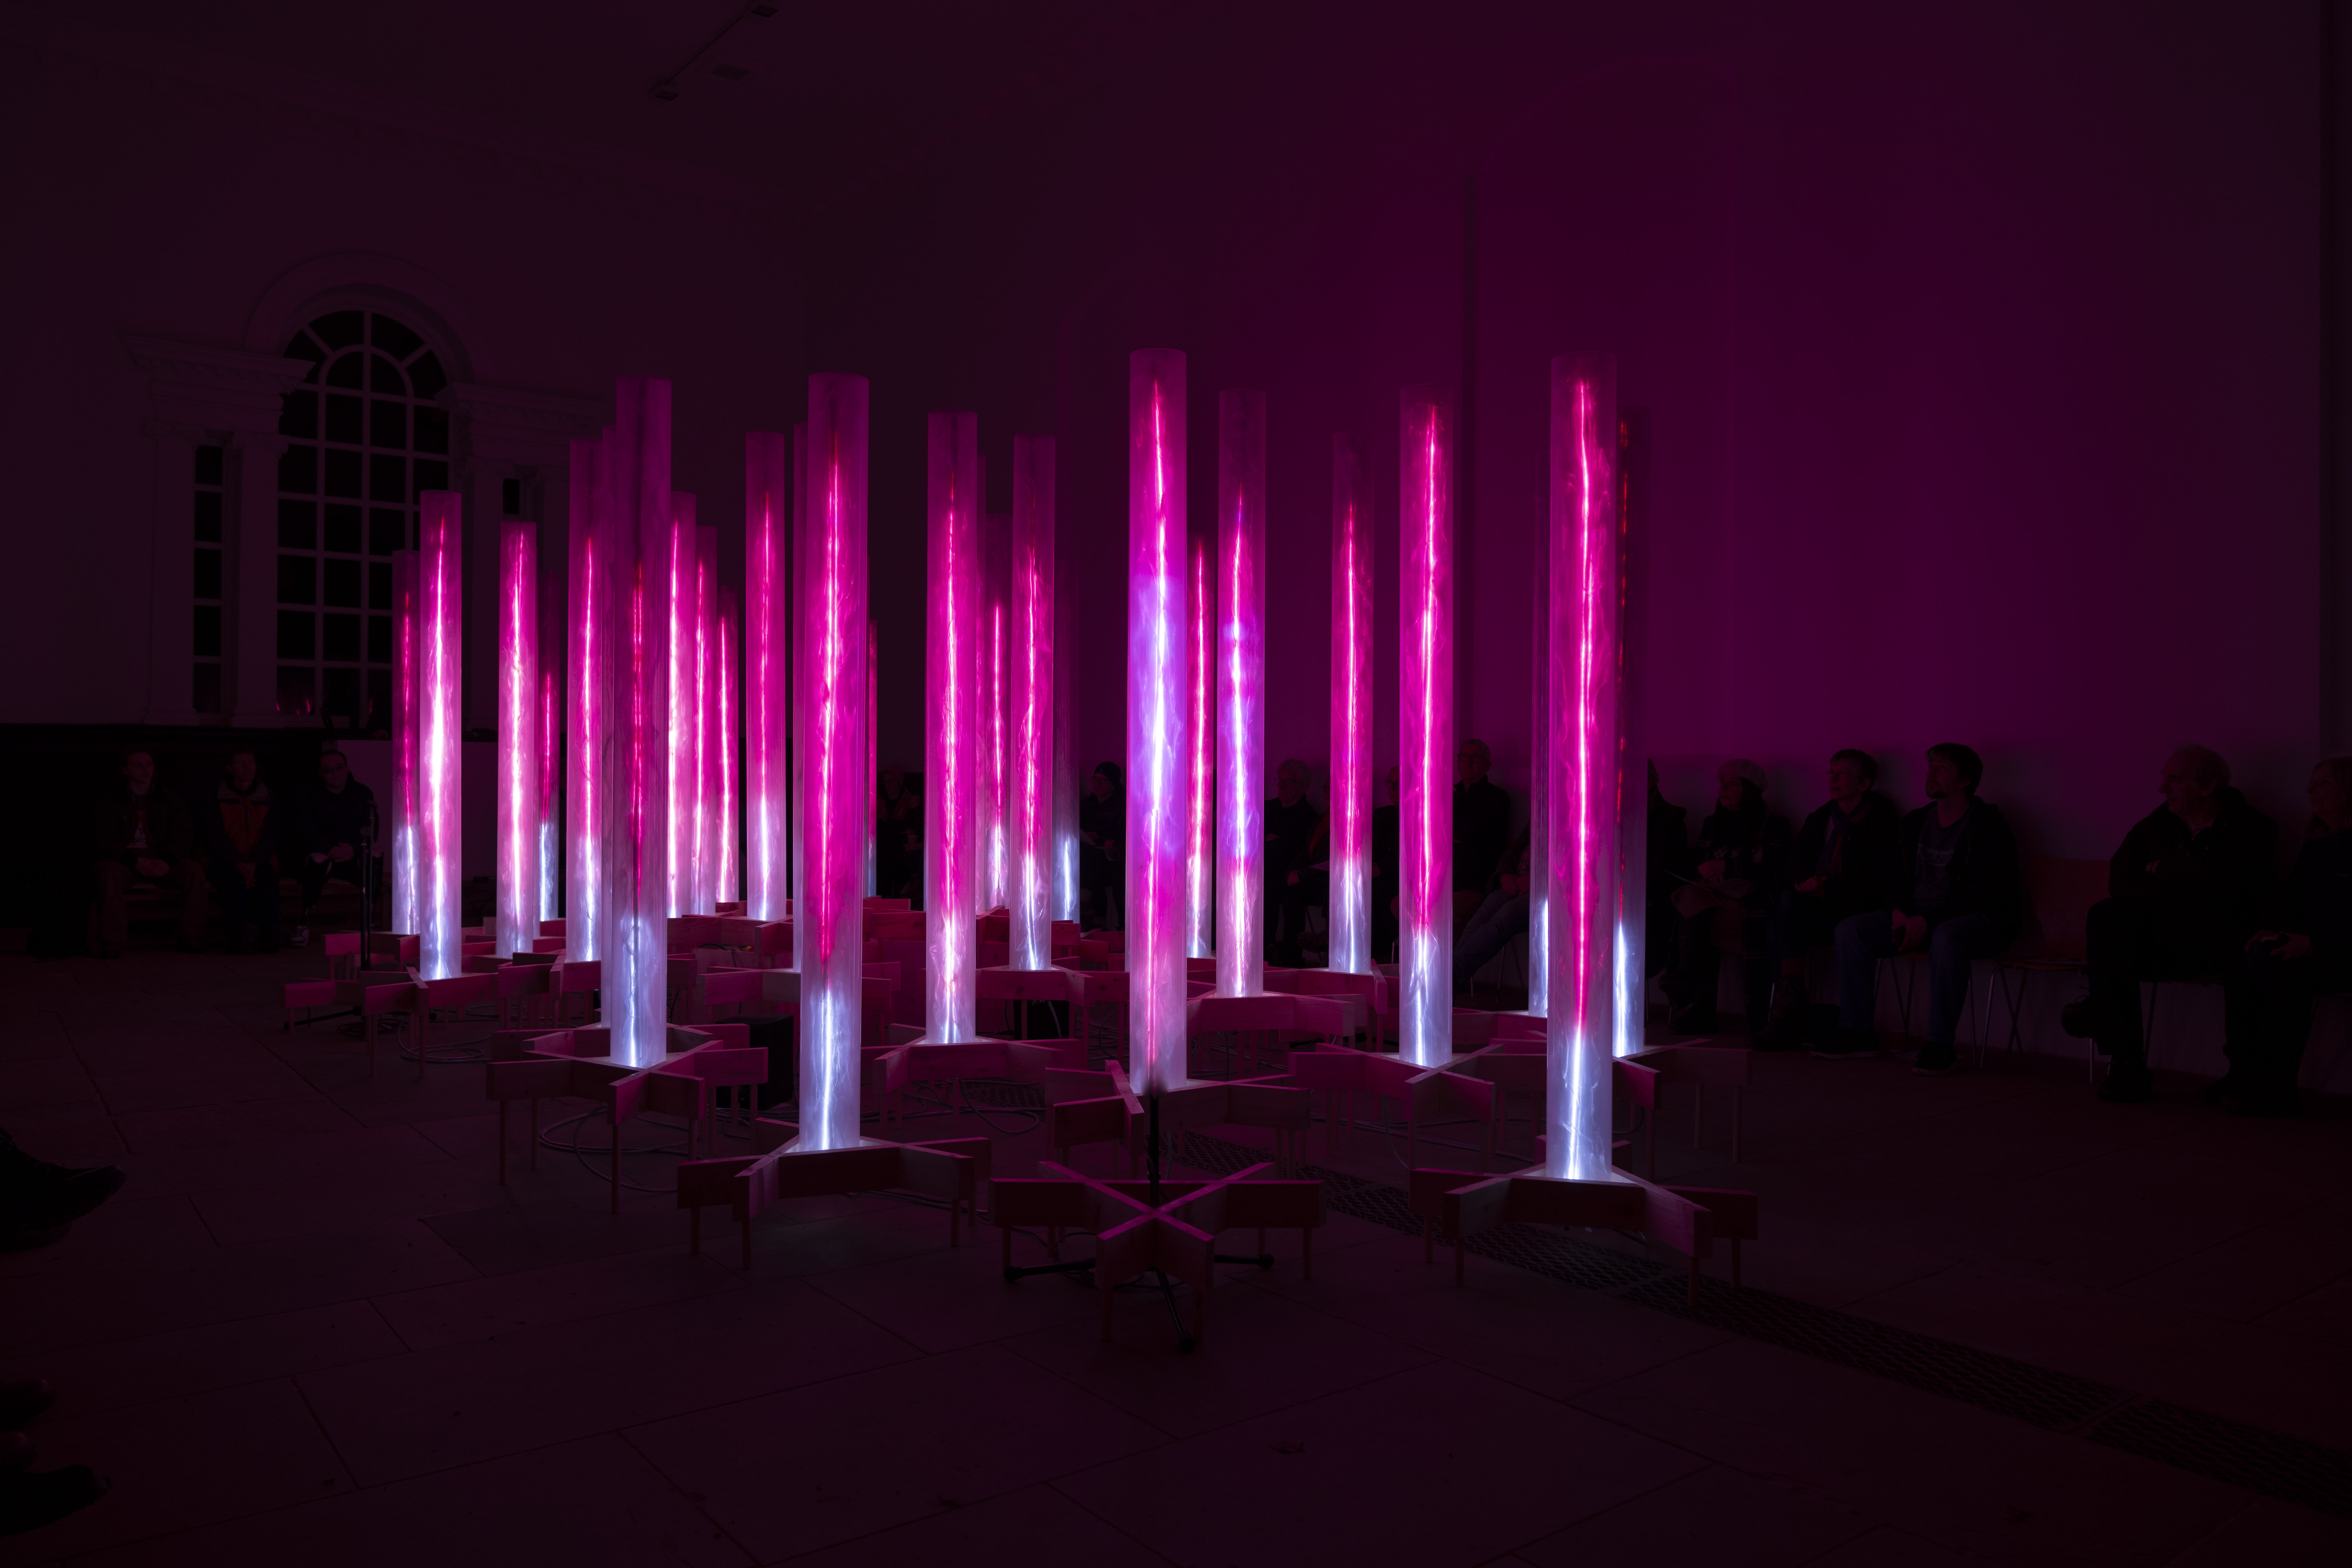 A collection of pink glowing columns